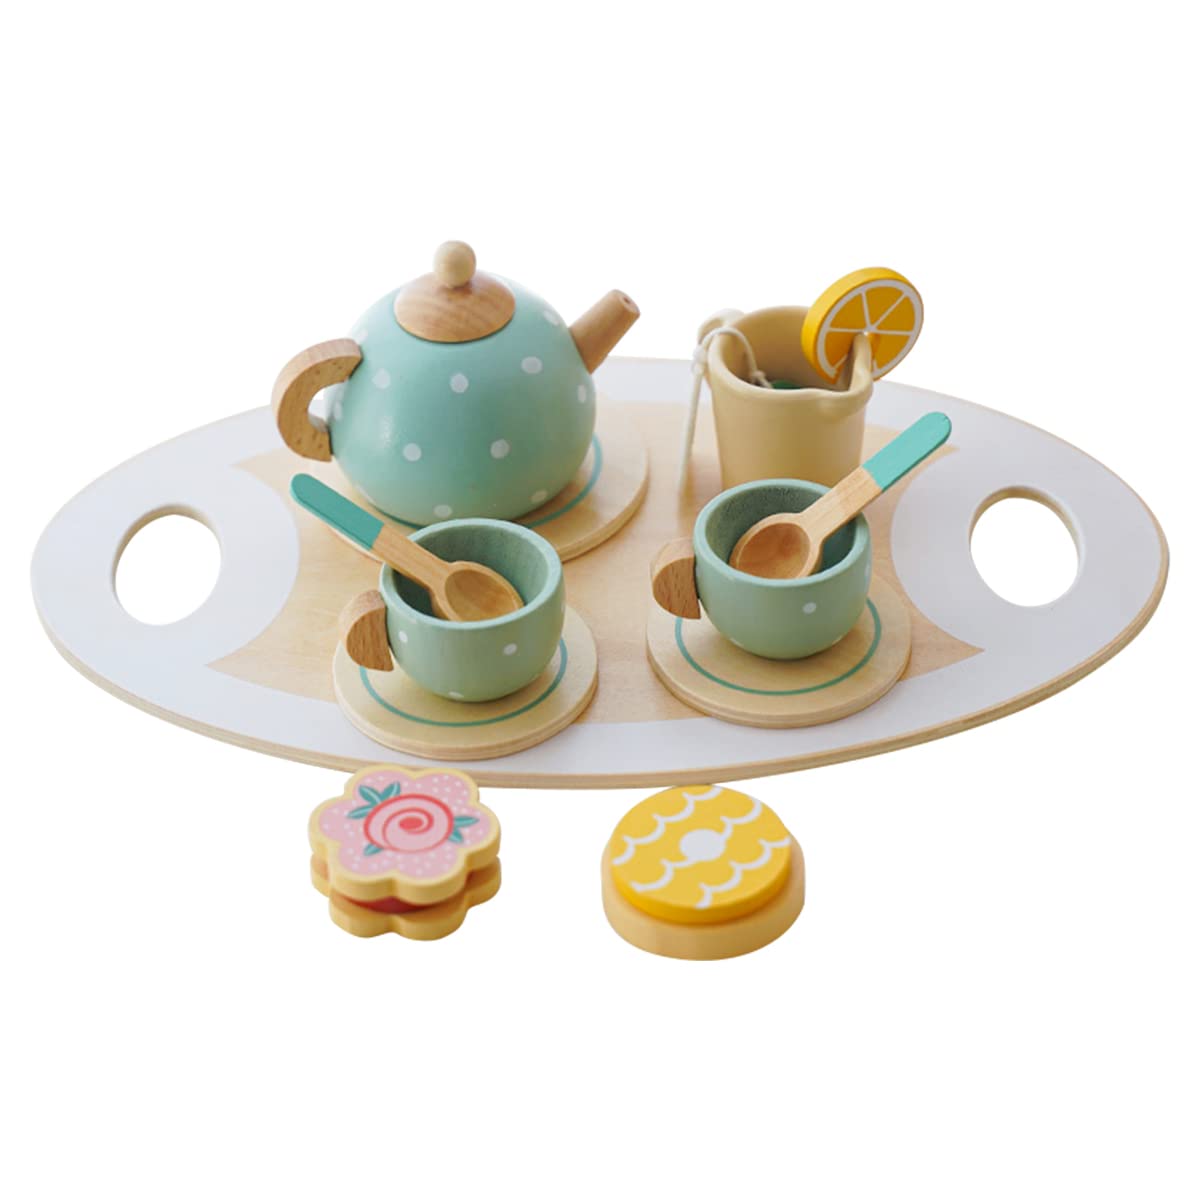 Toy Tea Set, Wooden Pretend Play Tea Party Set, Tea Time Toy Set, Role Play Toy Kitchen Accessories, Dessert Food Playset Interactive Simulation Teacup Toy for Toddlers Kids